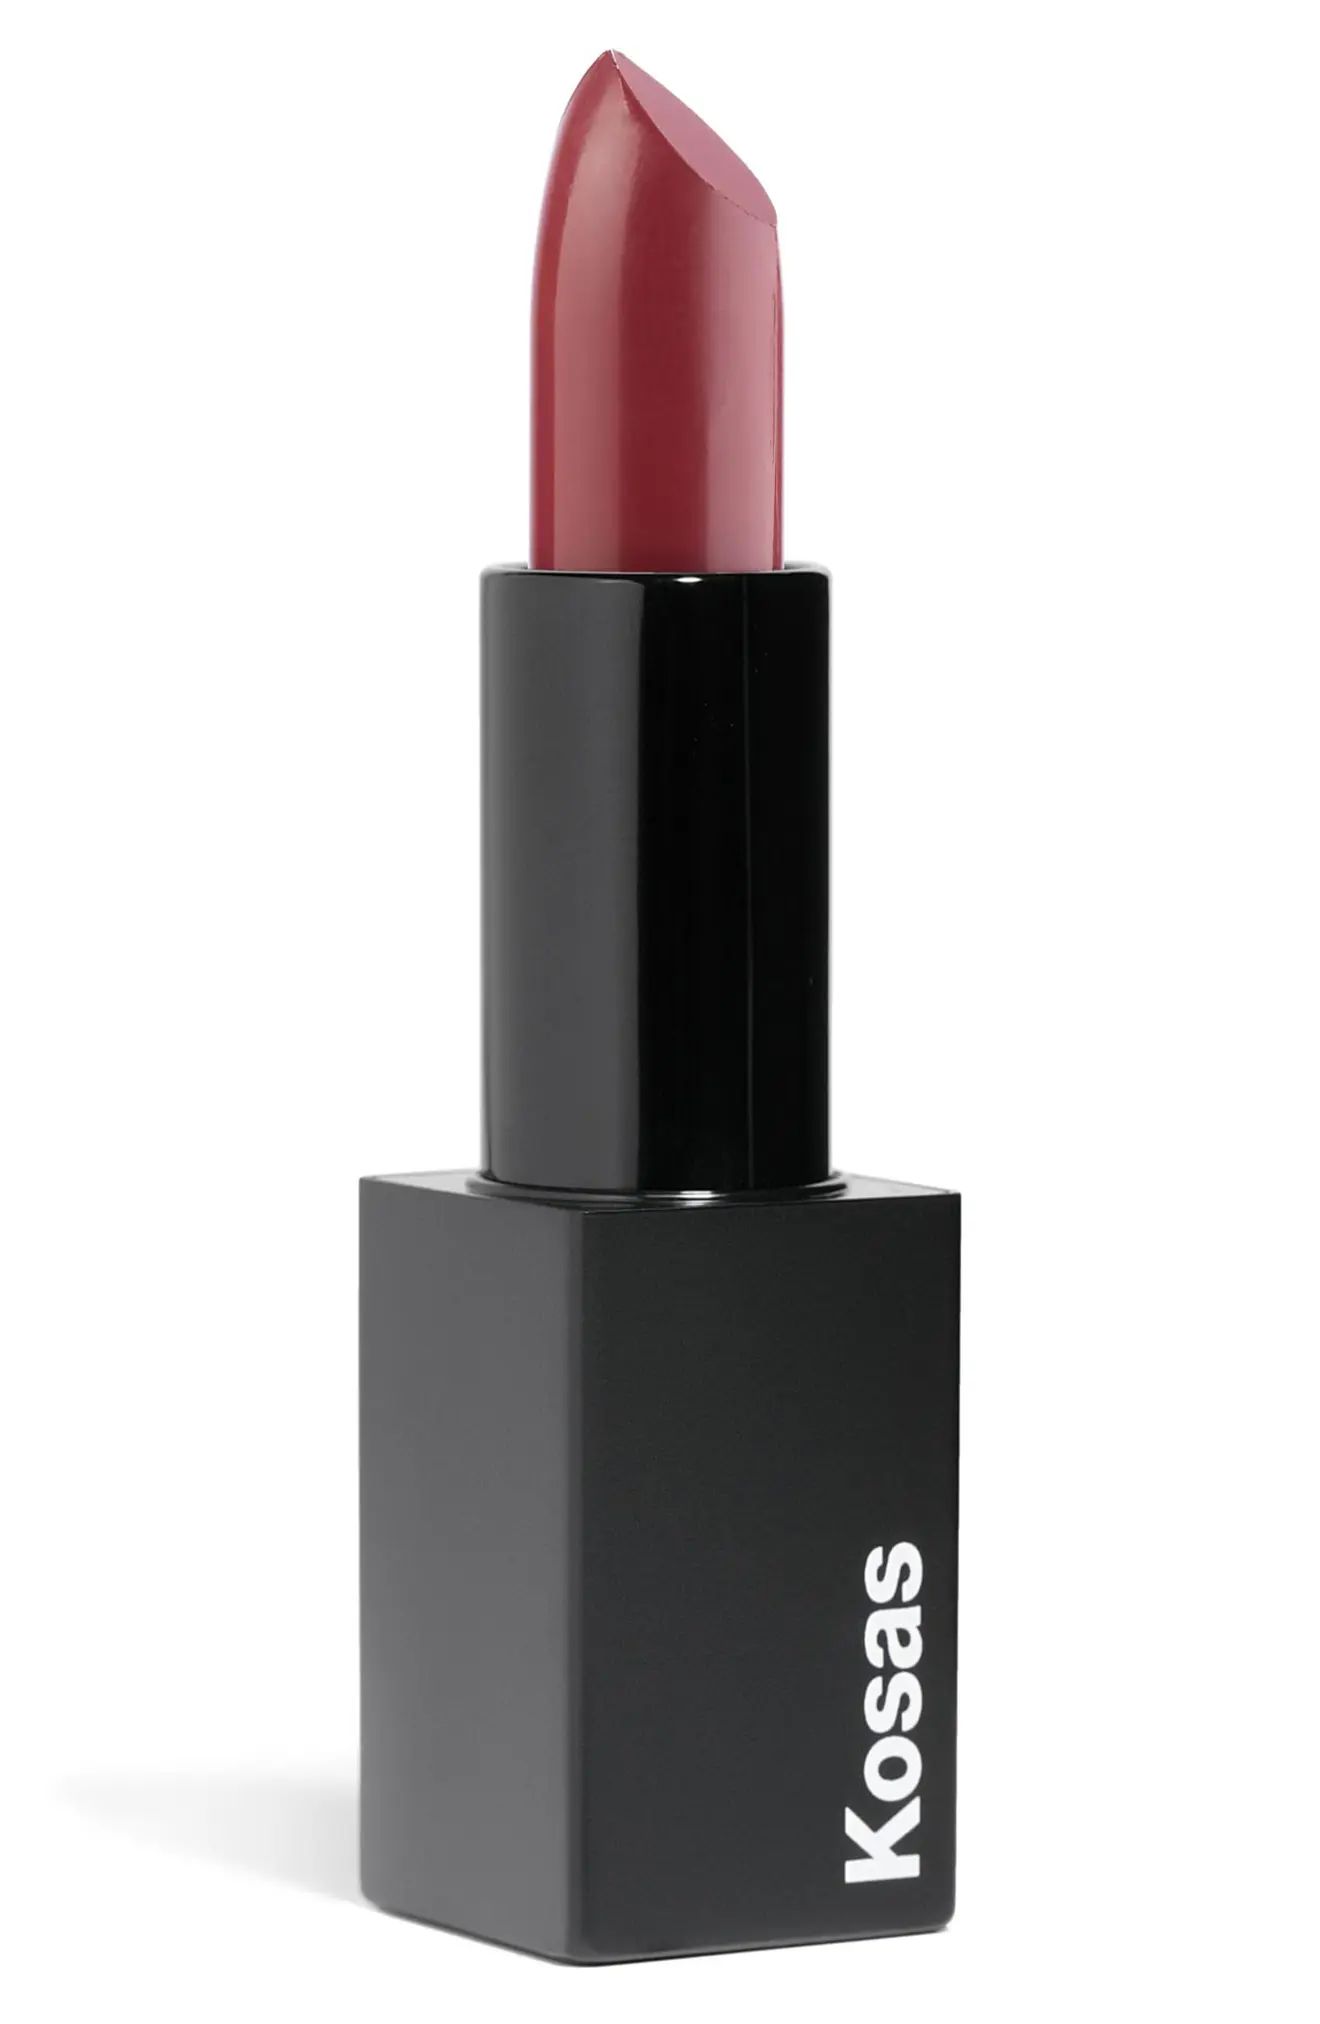 Kosas Weightless Lip Color in Undone at Nordstrom | Nordstrom